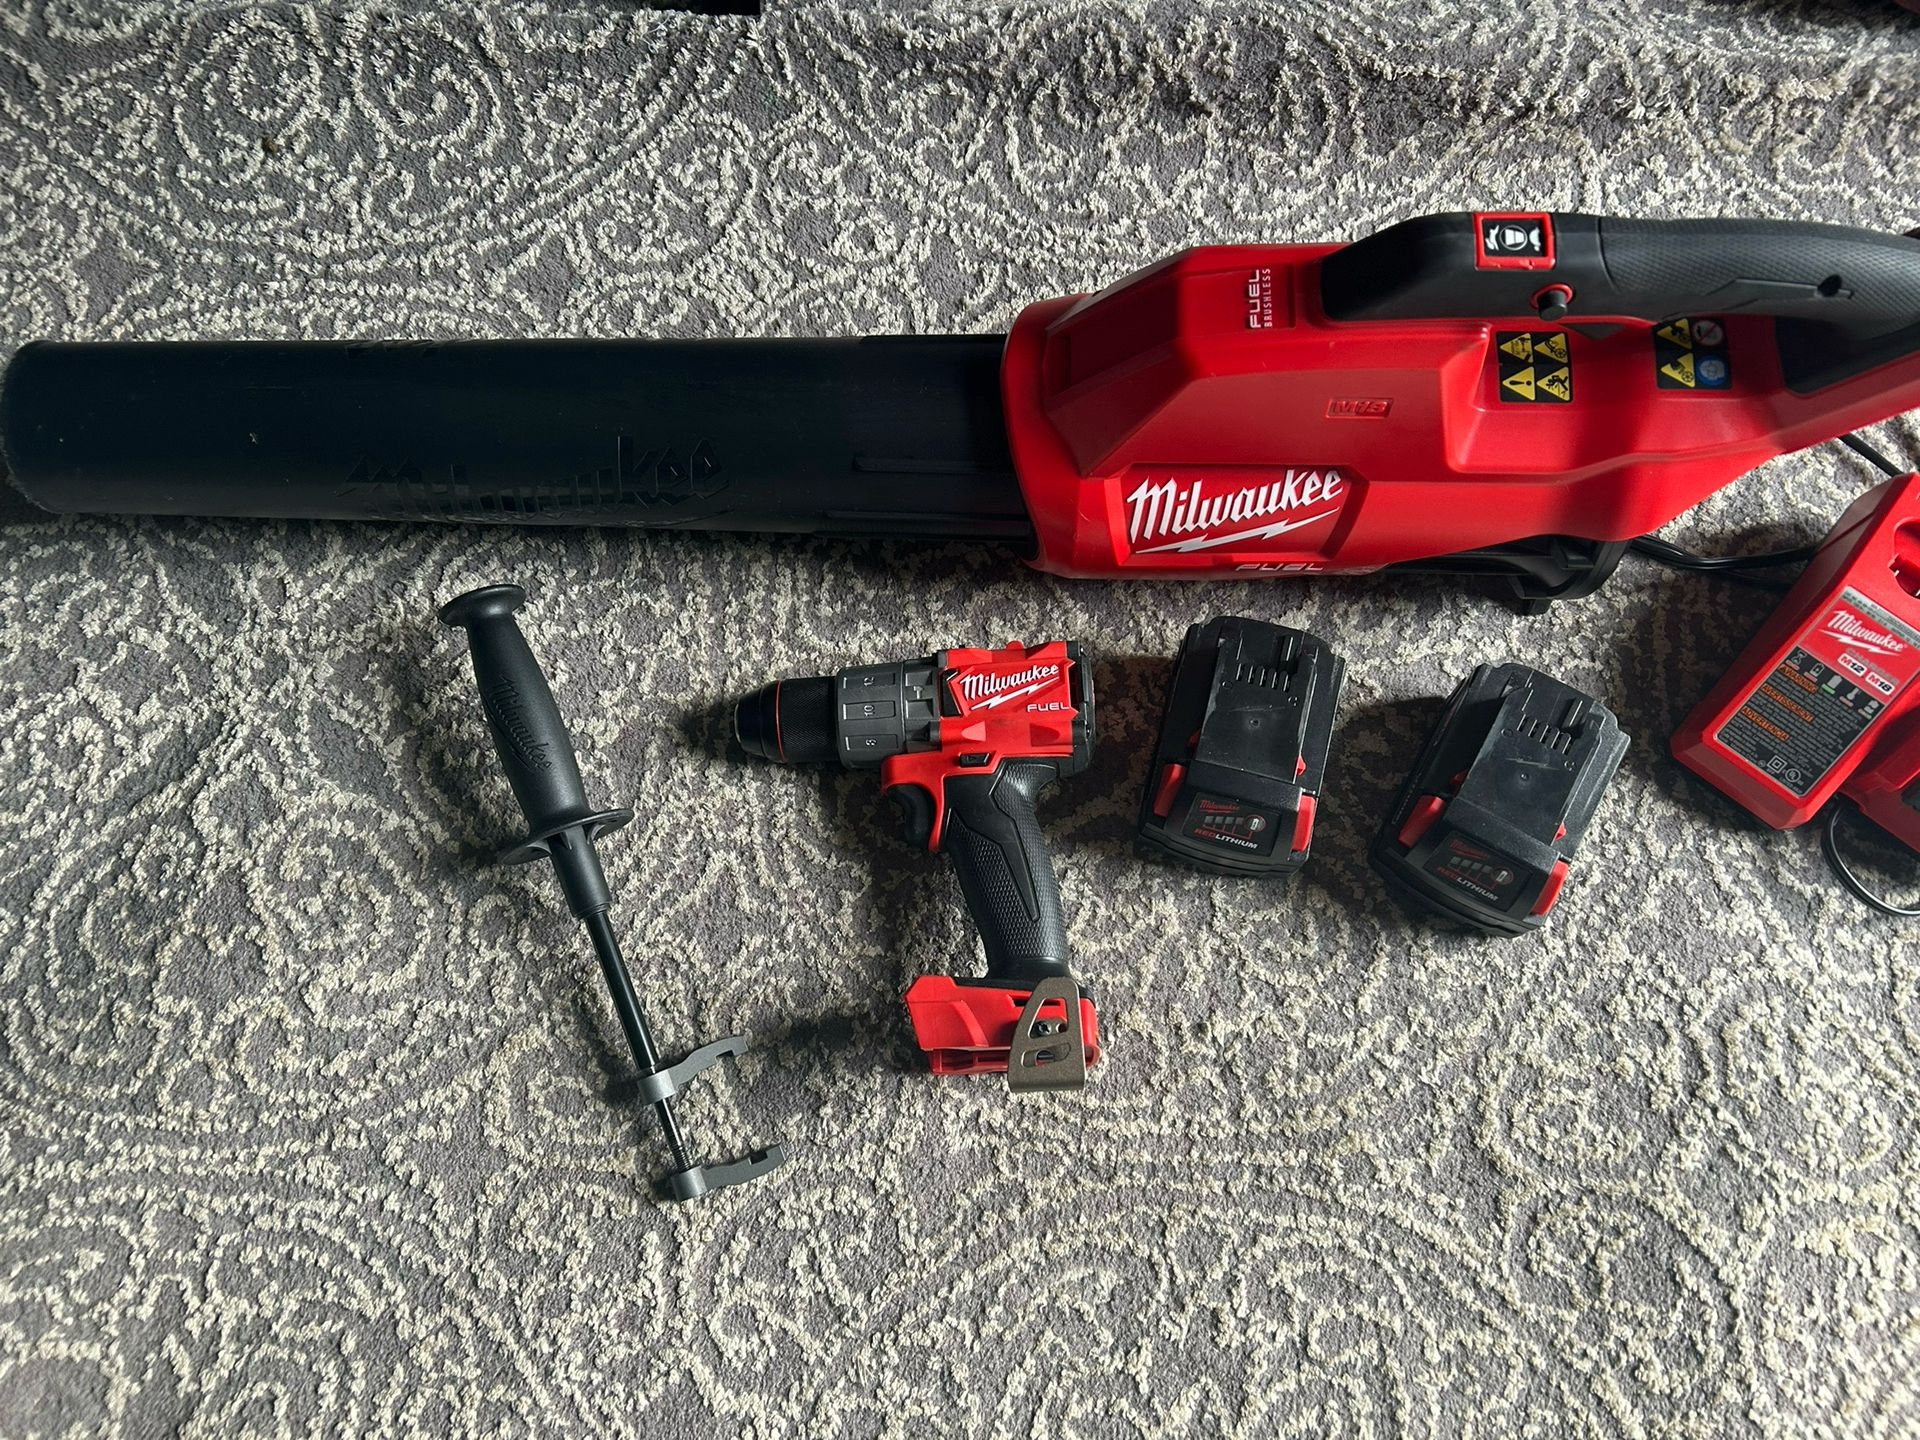 Milwaukee Fuel 18v Hammer Drill, 5.0 Batteries (2x), Charger, Brushless Blower